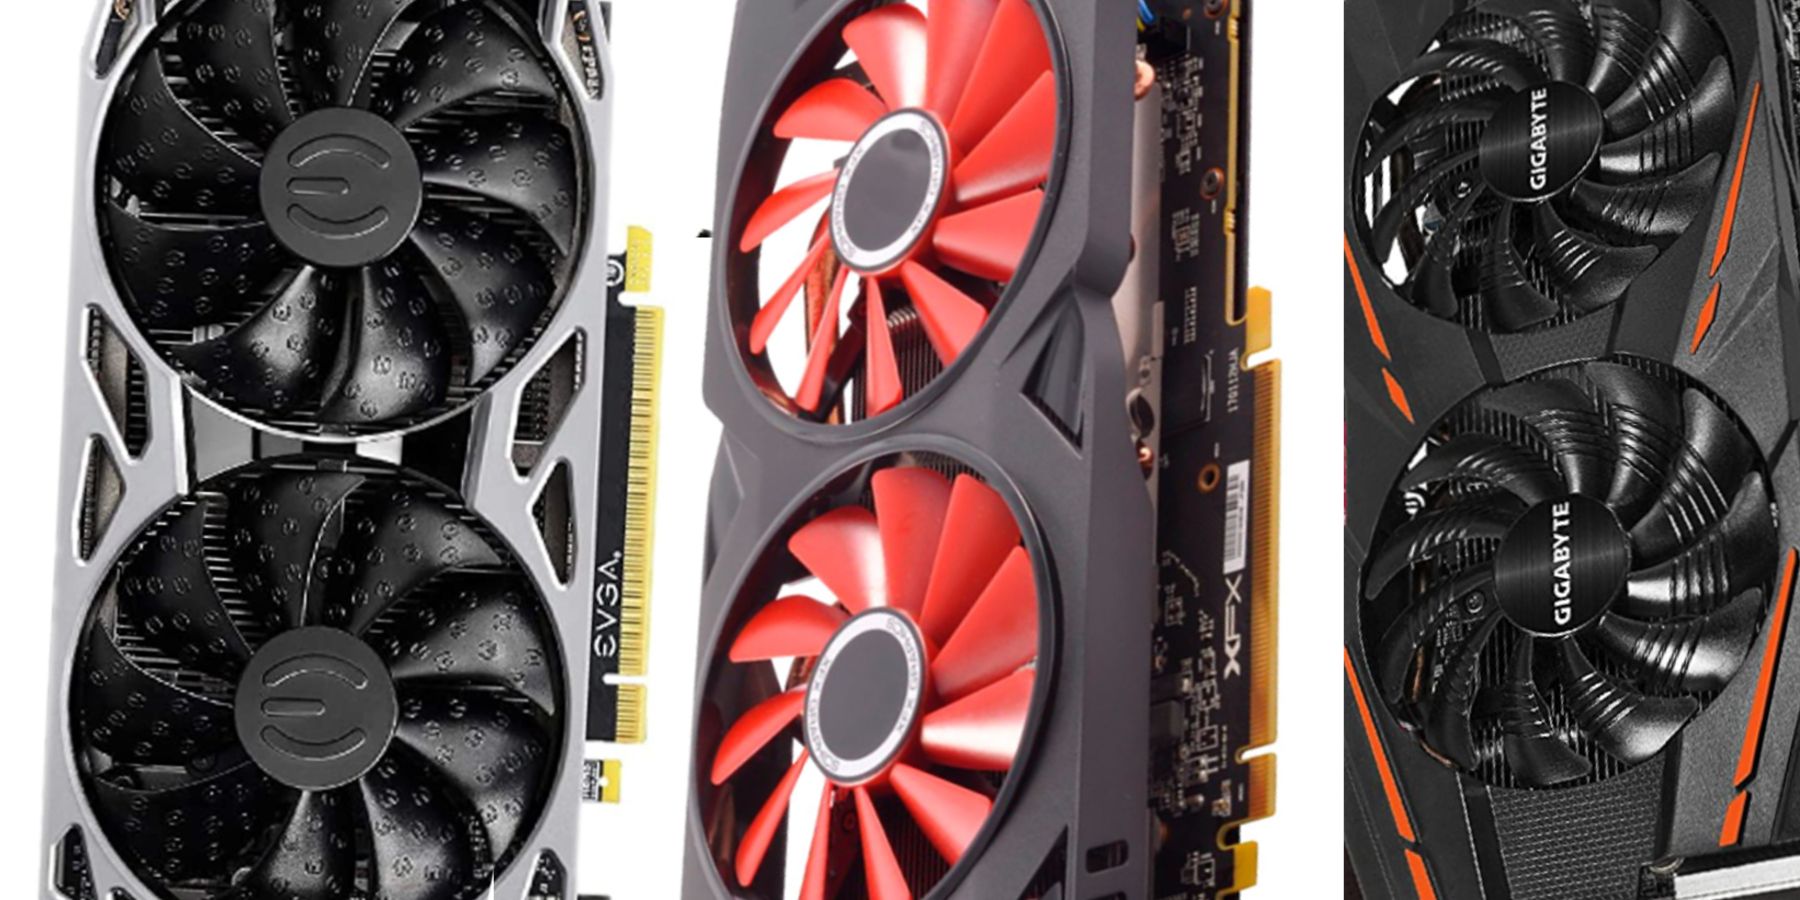 The Best Budget Graphic Cards To Consider In 2021